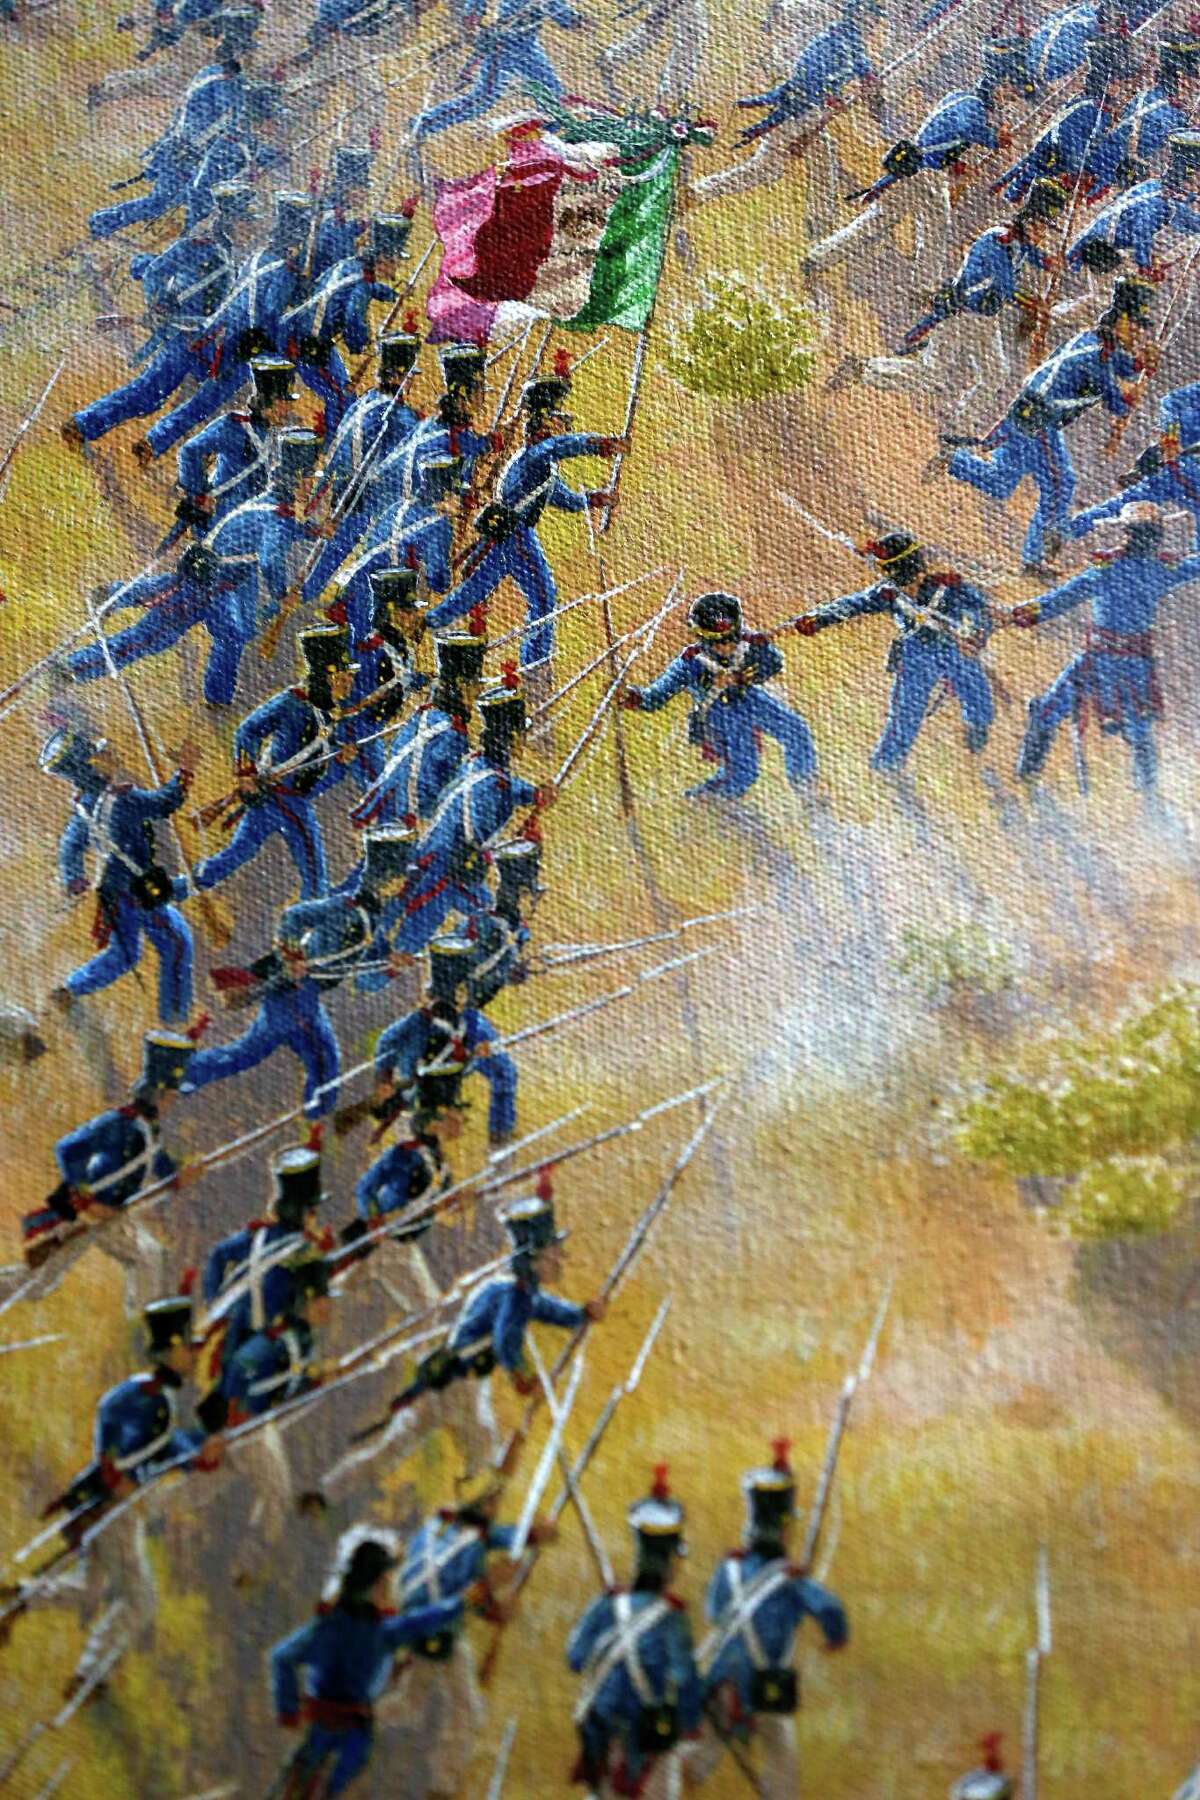 A detail is seen Thursday Match 5, 2015 of artist Mark Lemon, one of the leading modern artists whose works focus on the Alamo mission and battle site, titled ?’The Storming of the Alamo, March 6, 1836,?“ said to be the largest, most historically accurate detailed painting of the battle, at 8 feet tall and 15 feet wide. Lemon said it took him about 3,500 hours over 14 months to do the work.